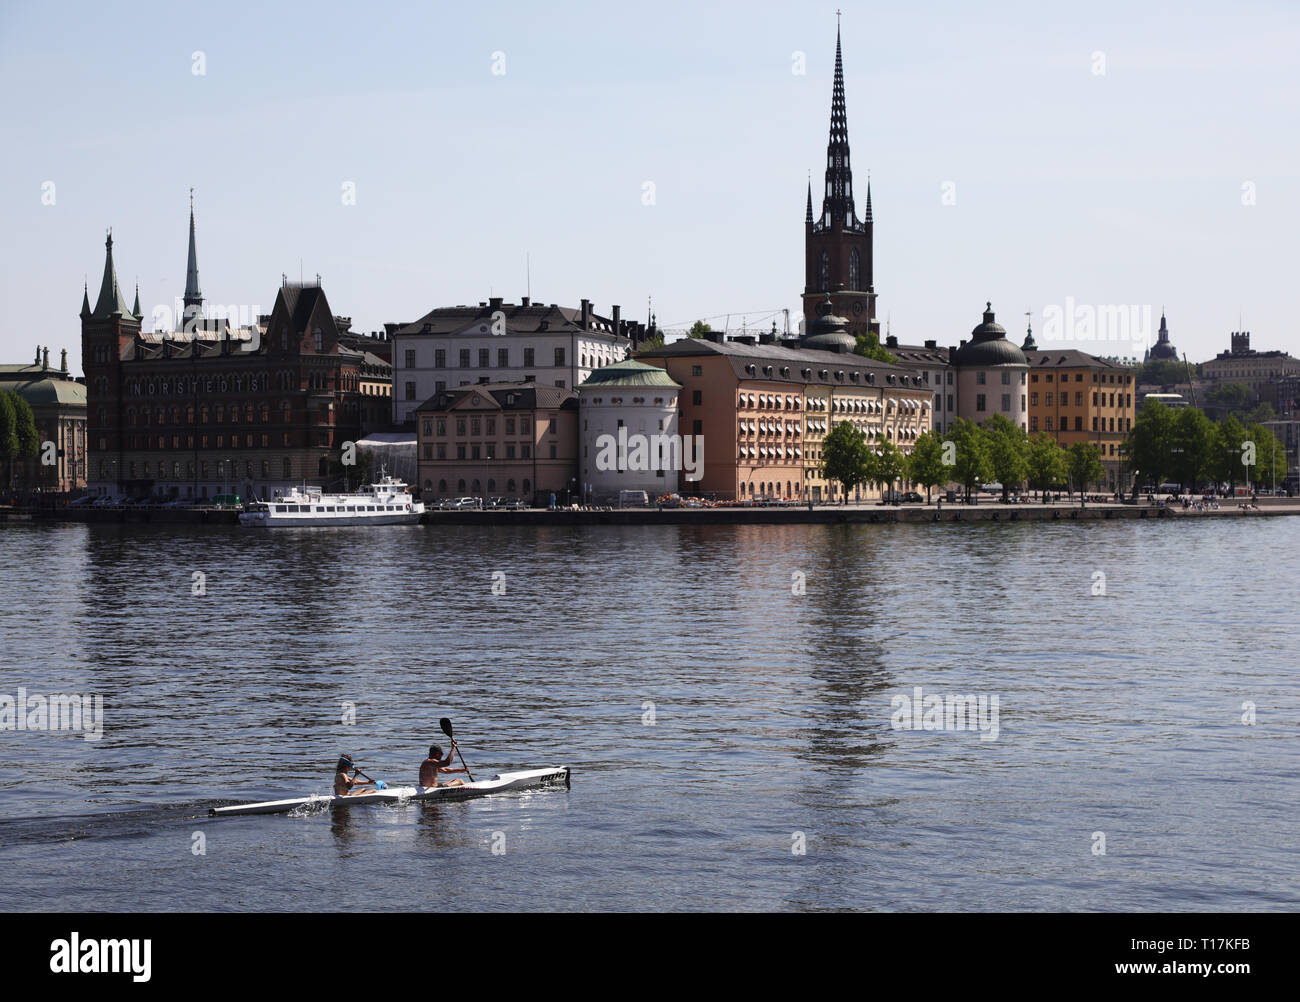 Kajak Stockholm High Resolution Stock Photography and Images - Alamy